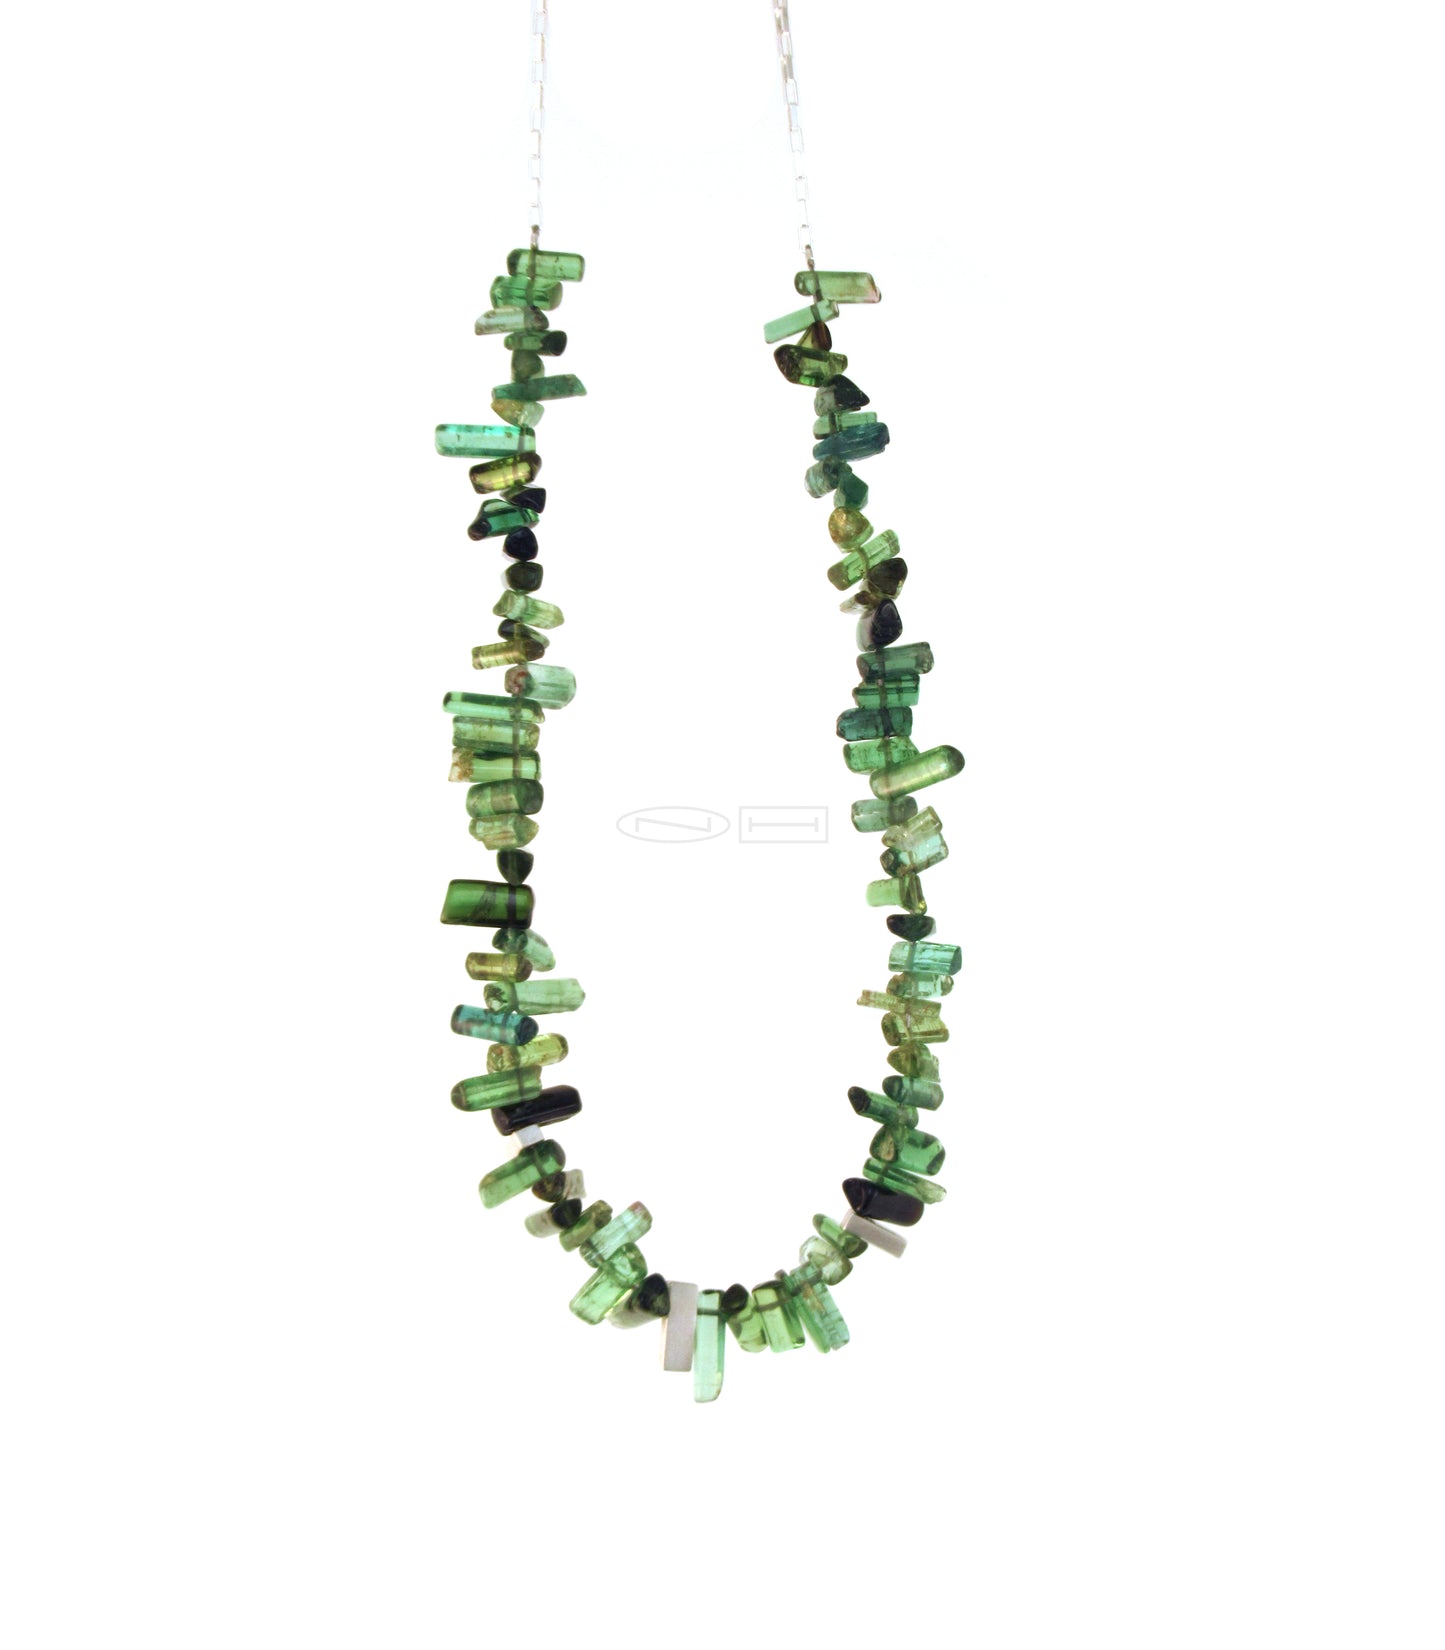 Tourmaline necklace made by ZEALmetal in Kingston ON